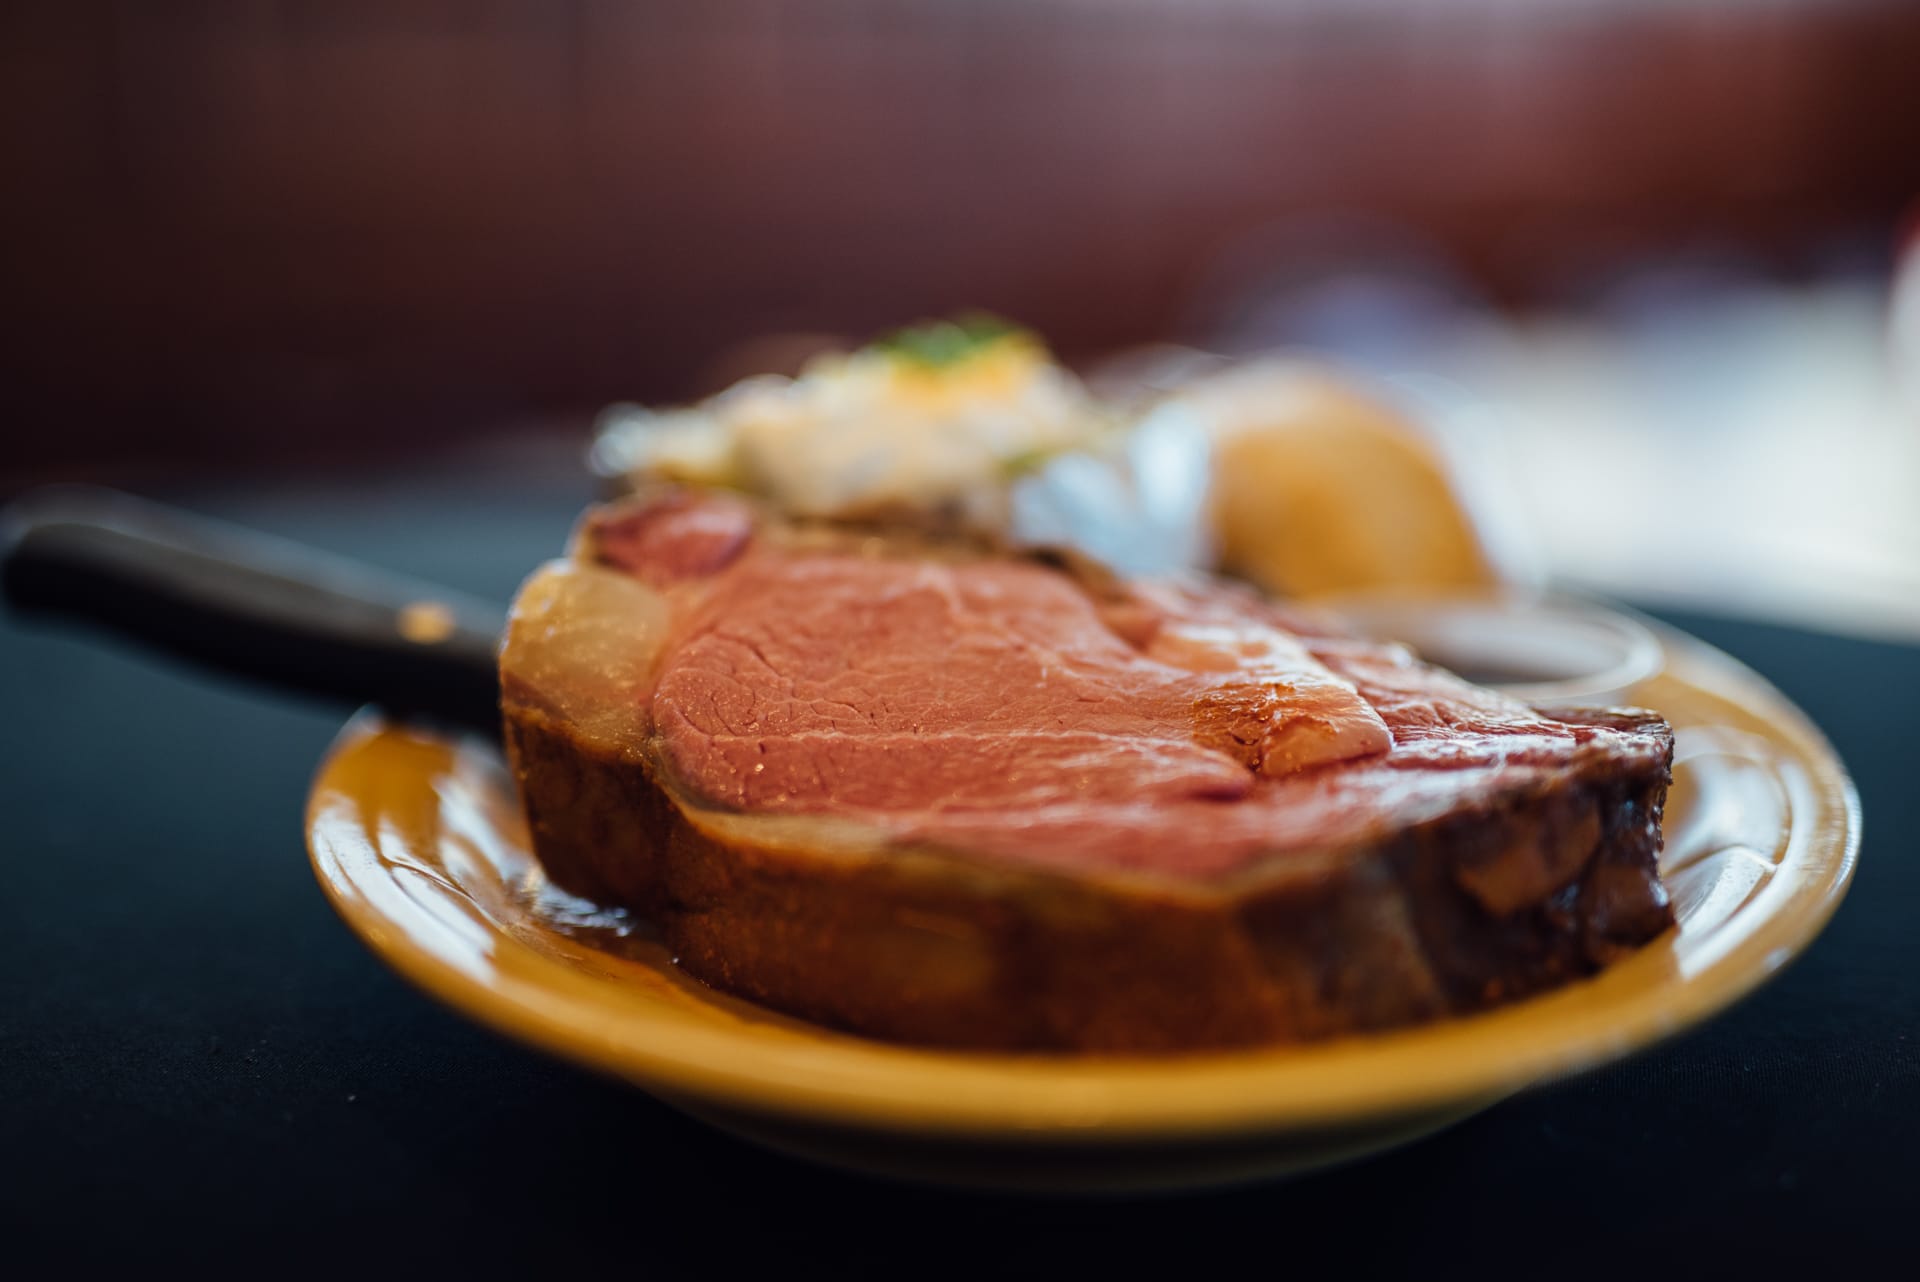 Friday Prime Rib – The Oasis Bar & Grill